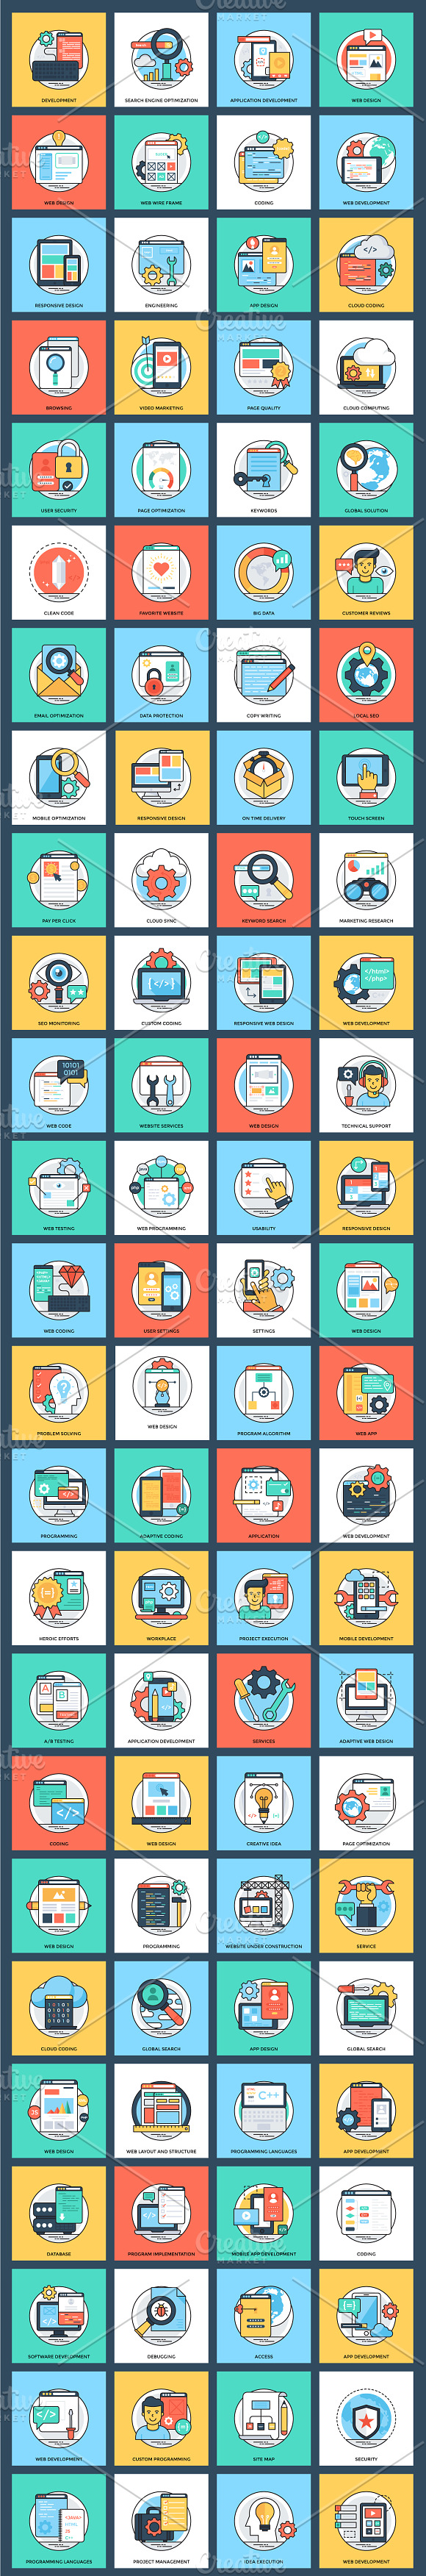 100 Flat Web Development Icons in Icons - product preview 1